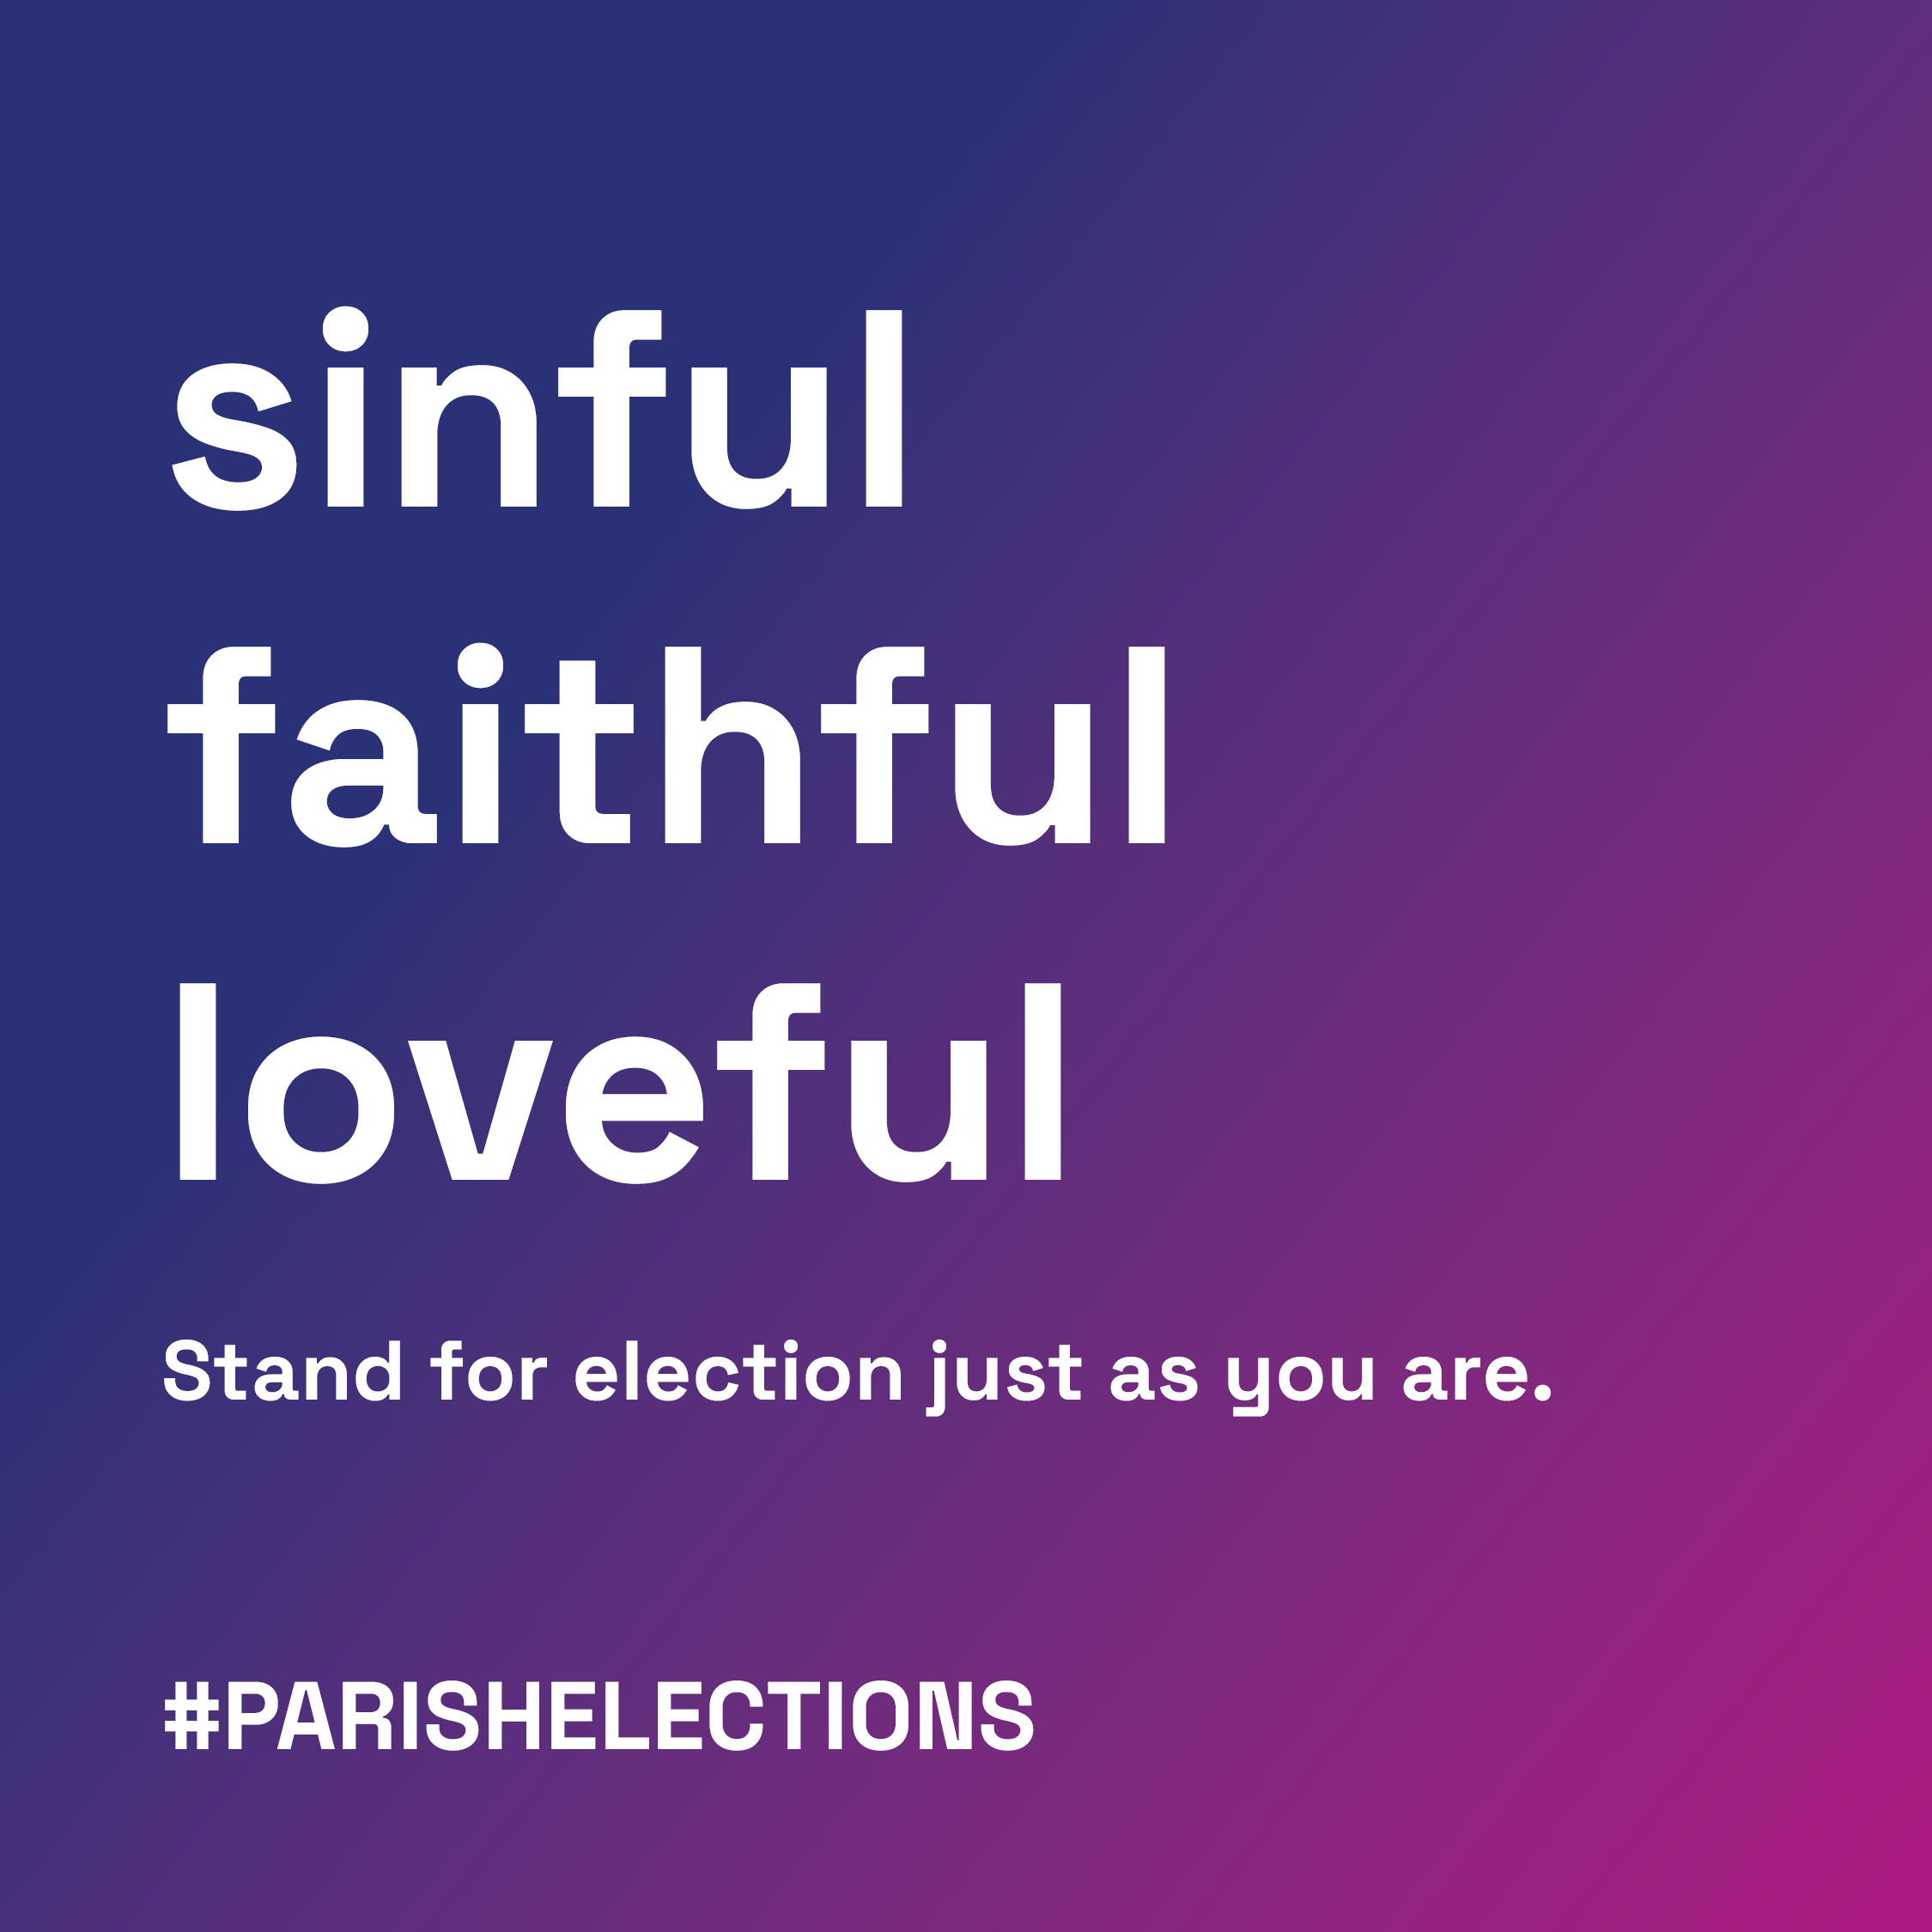 Sinful, faithful, loveful. Stand for election just as you are. #parishelections